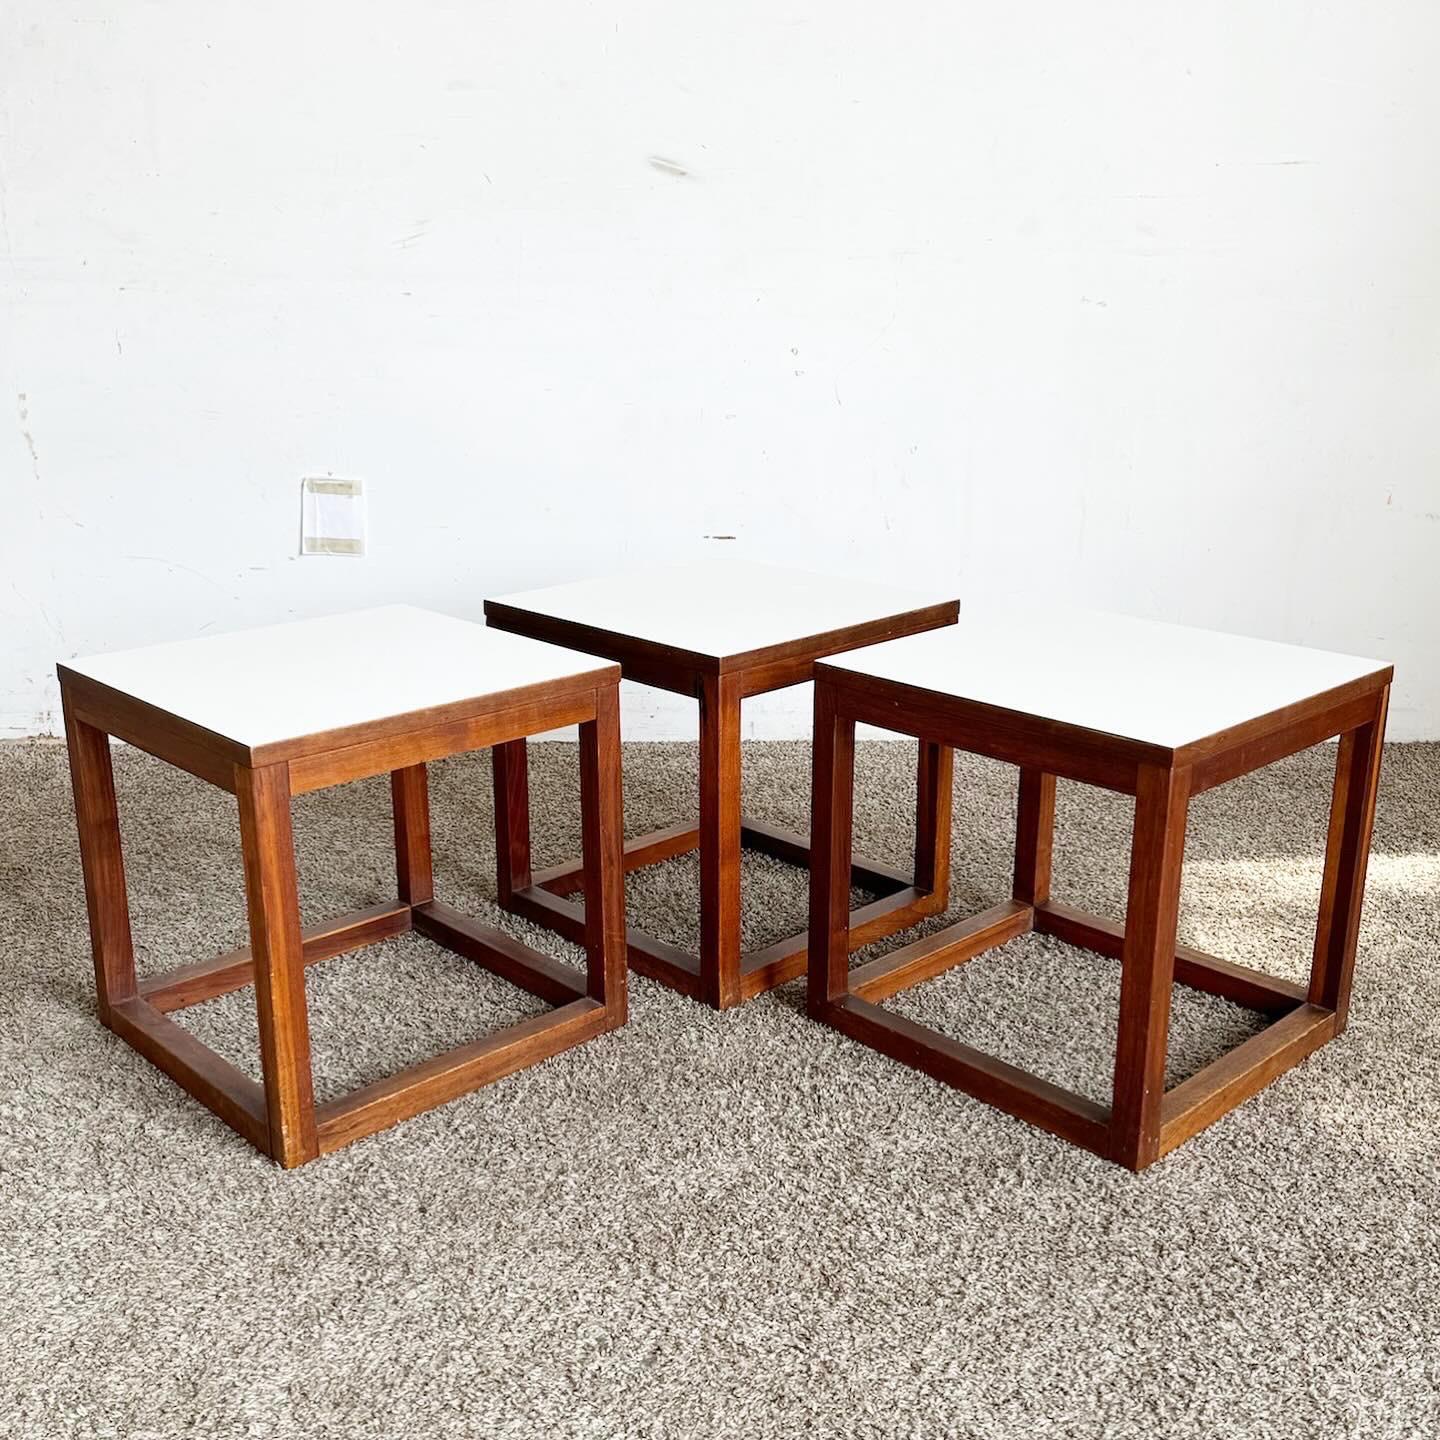 The Mid Century Modern Teak Cubic Side Tables - Set of 3 captures the essence of mid-century design. Made from durable teak wood with a beautiful grain, these tables feature clean geometric lines and a minimalist cubic shape. Versatile and